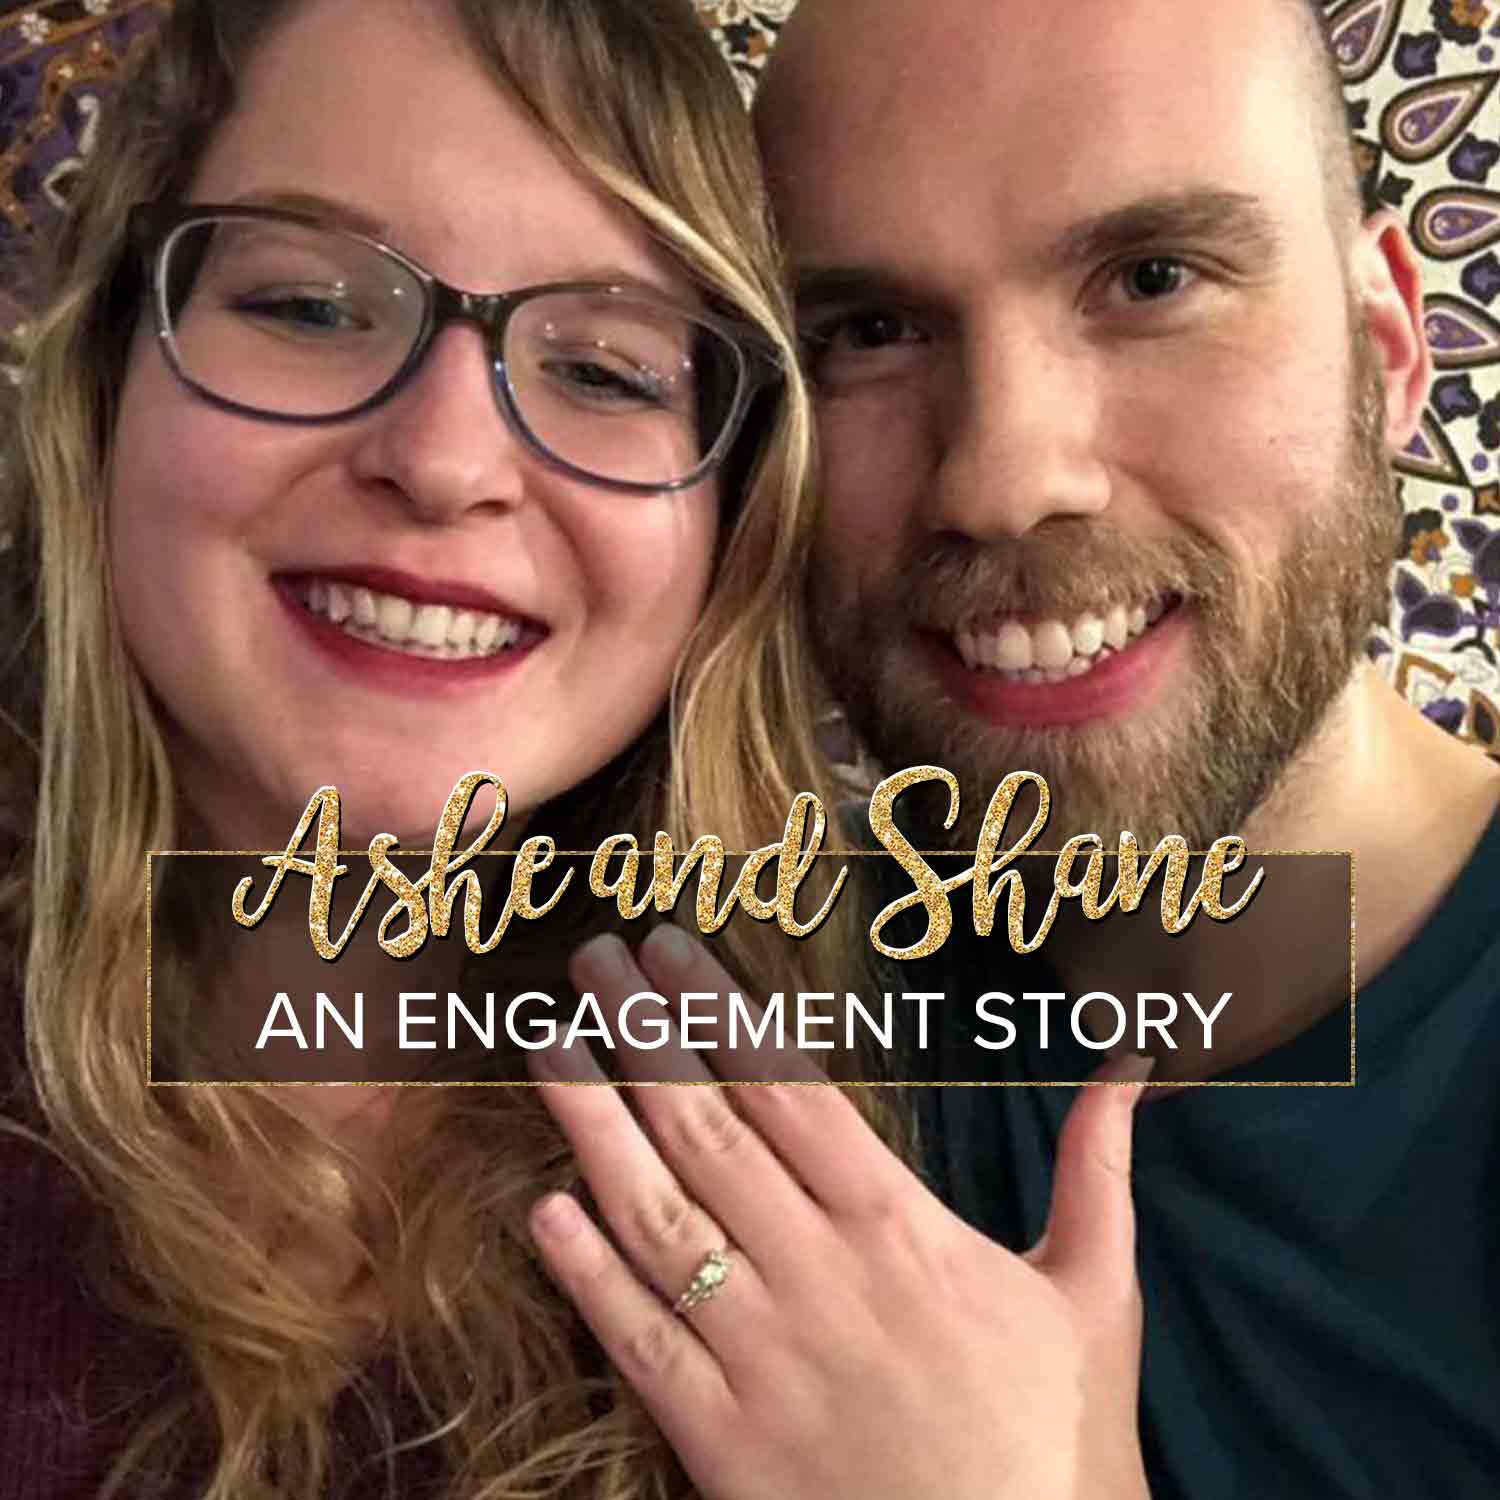 Ashe showing off his ring in front of the text "Ashe and Shane, an engagement story."